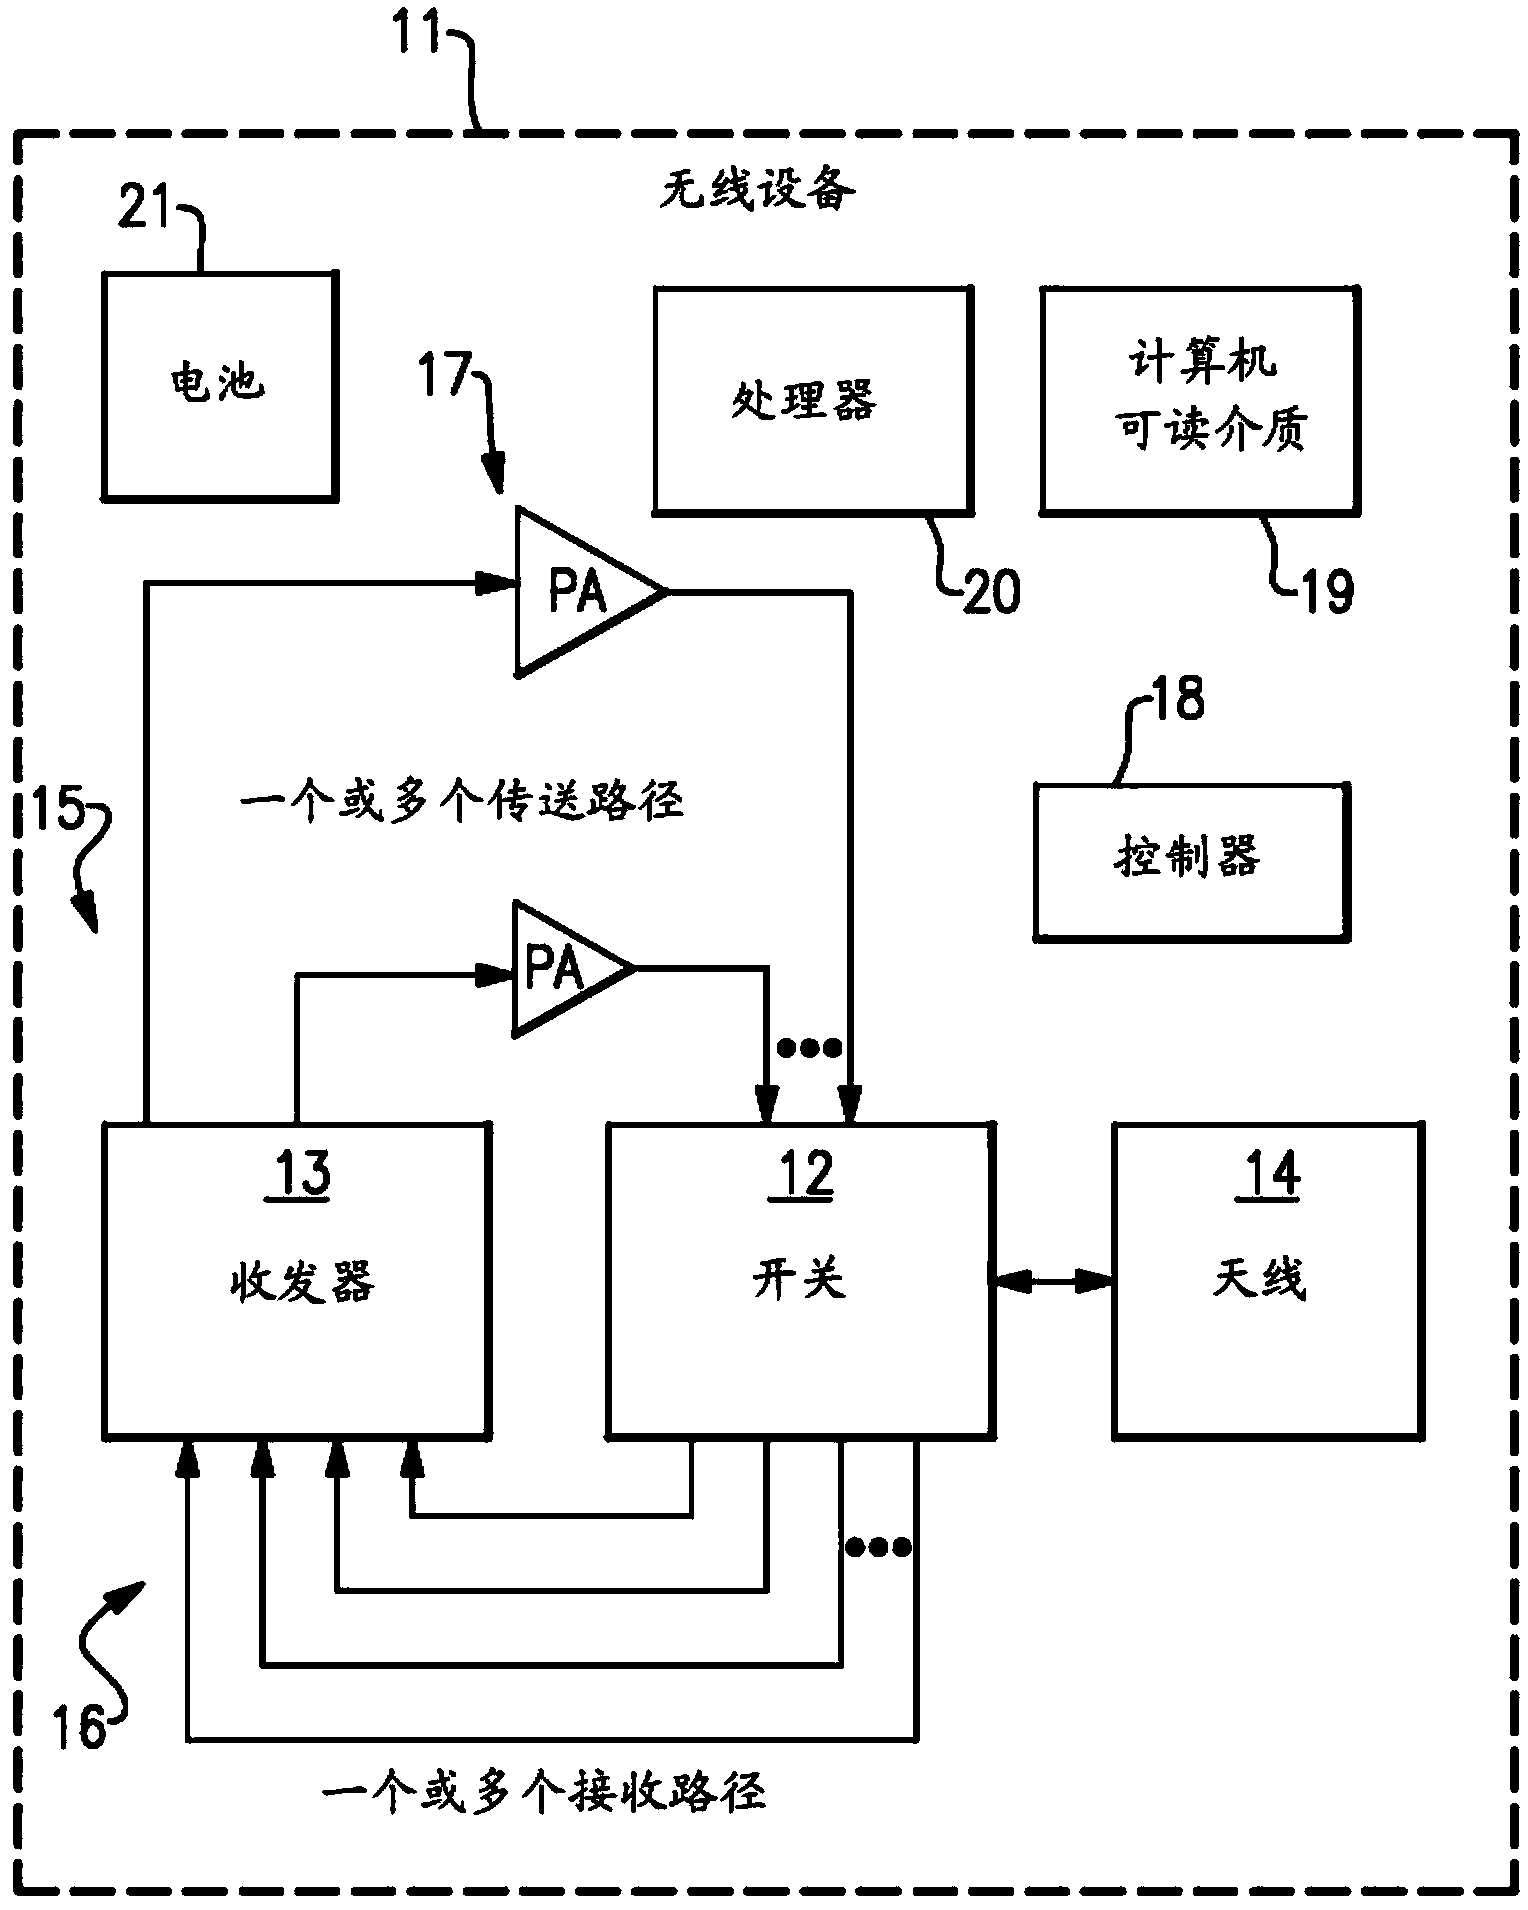 Apparatus and methods for biasing power amplifiers